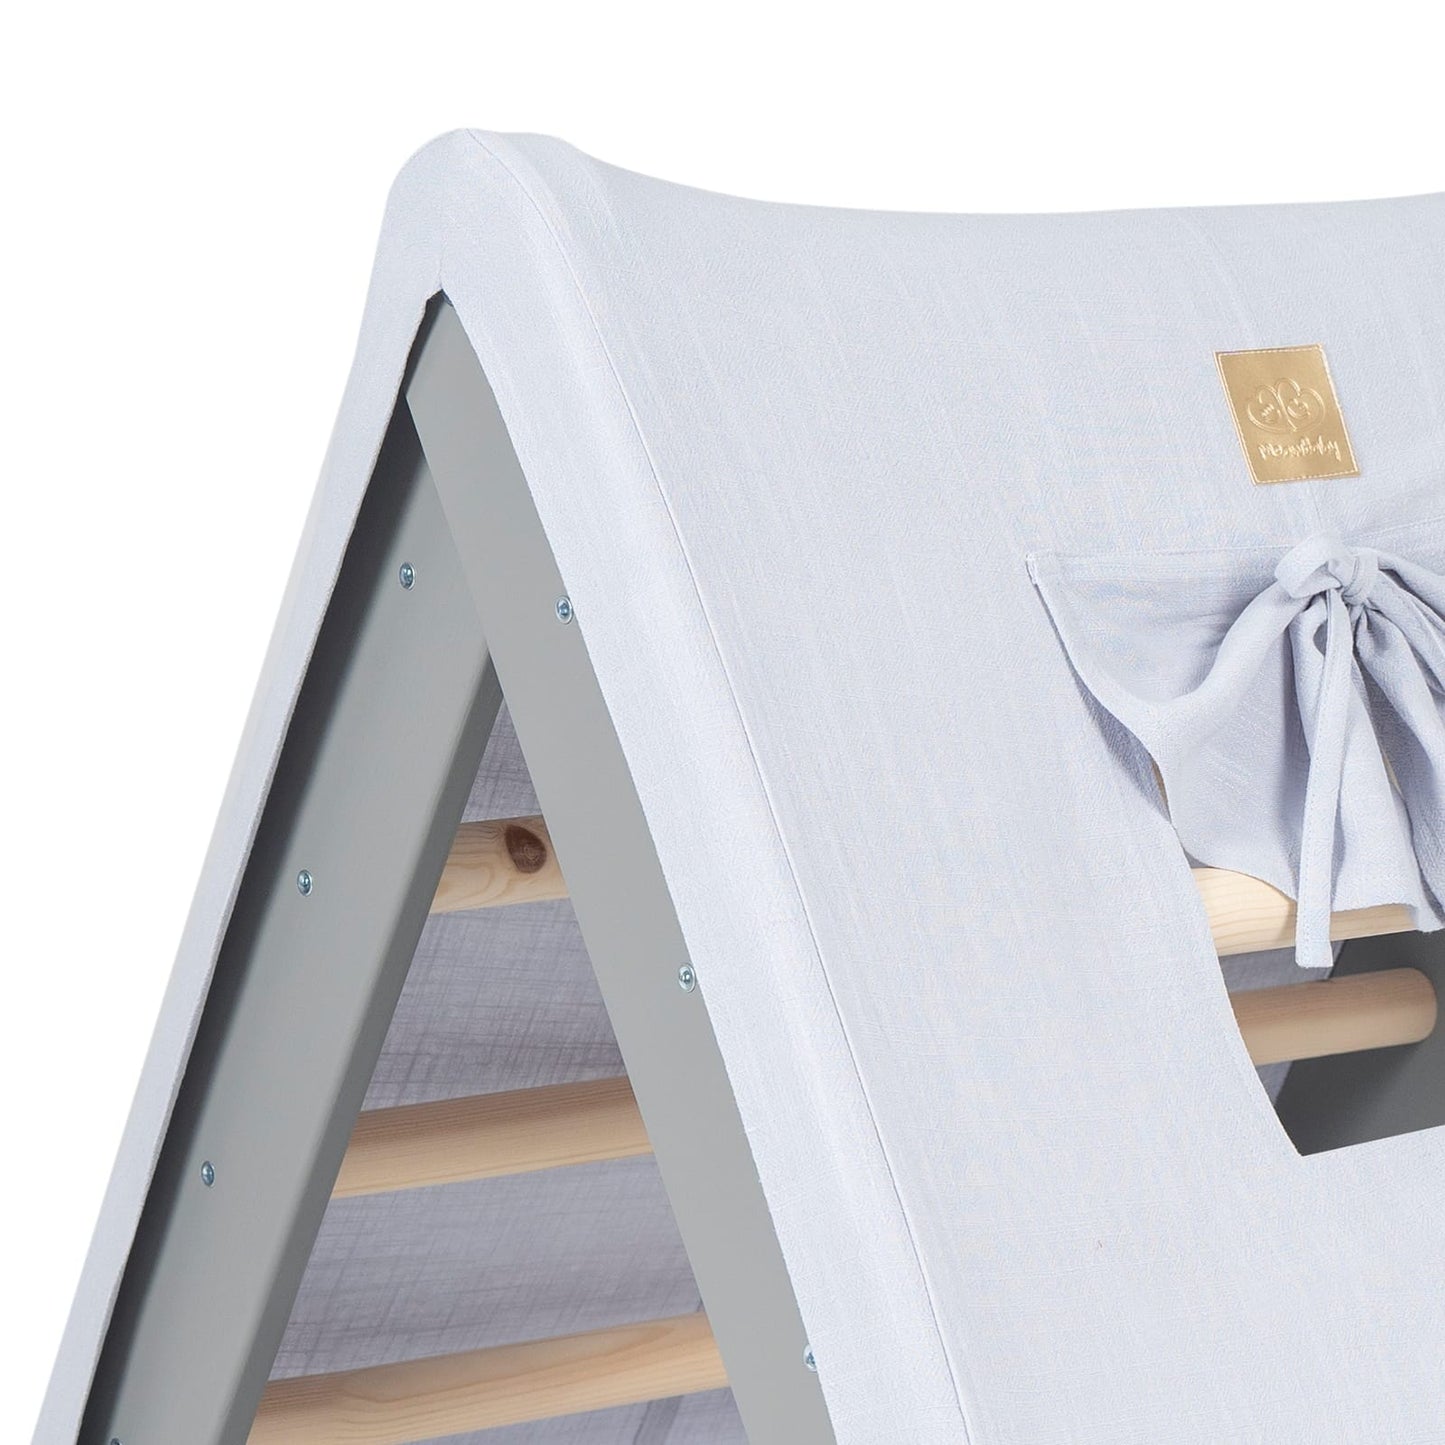 Folding Play House With Ladder For Kids By MeowBaby Grey & Blue Grey